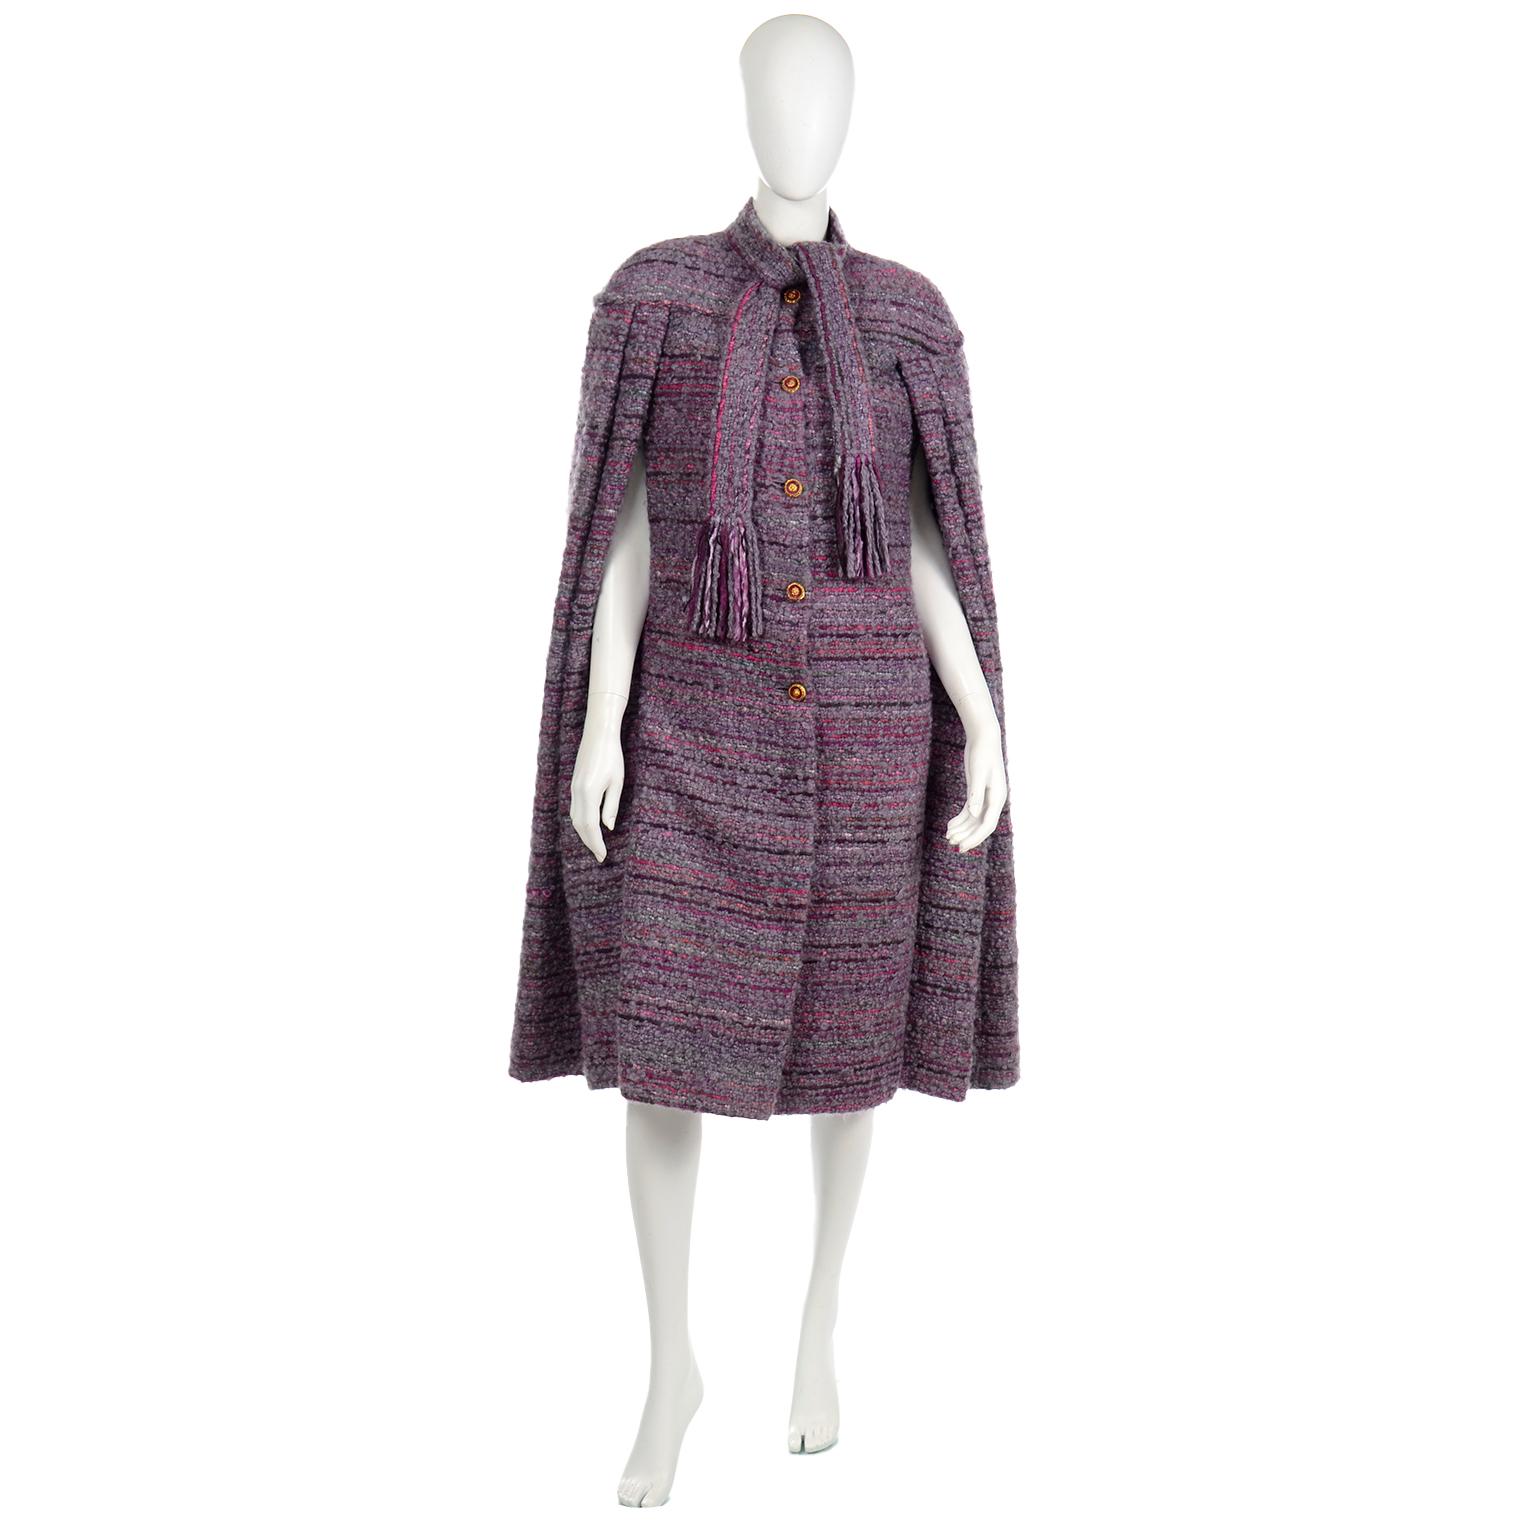 This is a very rare vintage Chanel Haute Couture wool boucle cape coat from the 1980's in a variety of shades of purple. This cape has pleating along the front and back, giving it a lot of volume in the body from the bust down. The arm opening is